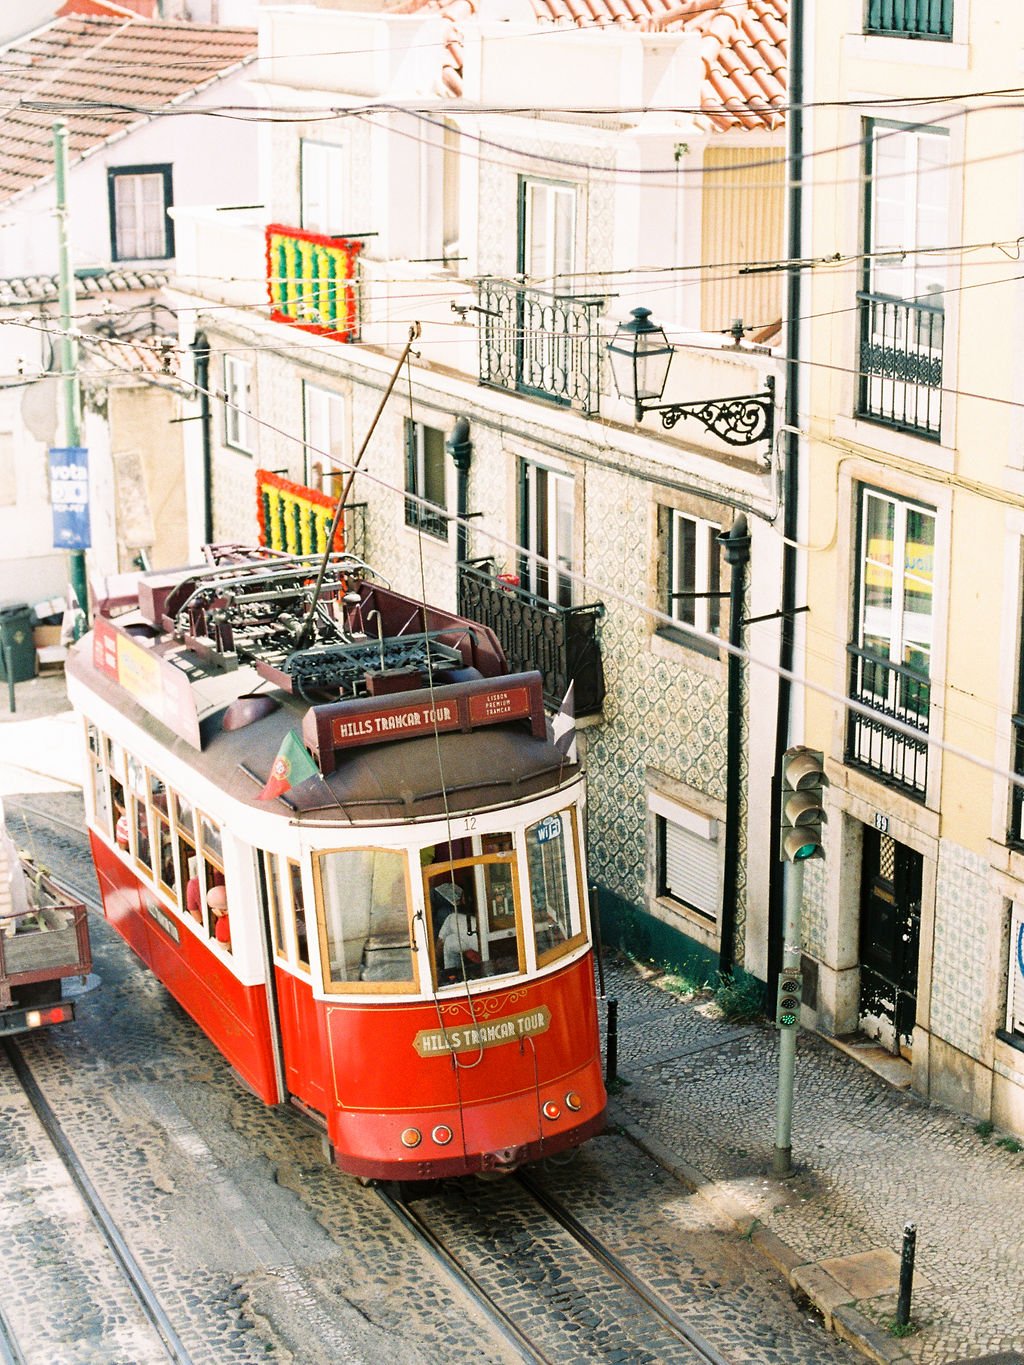 A red tram going uphill in the city Lisbon on a narrow street